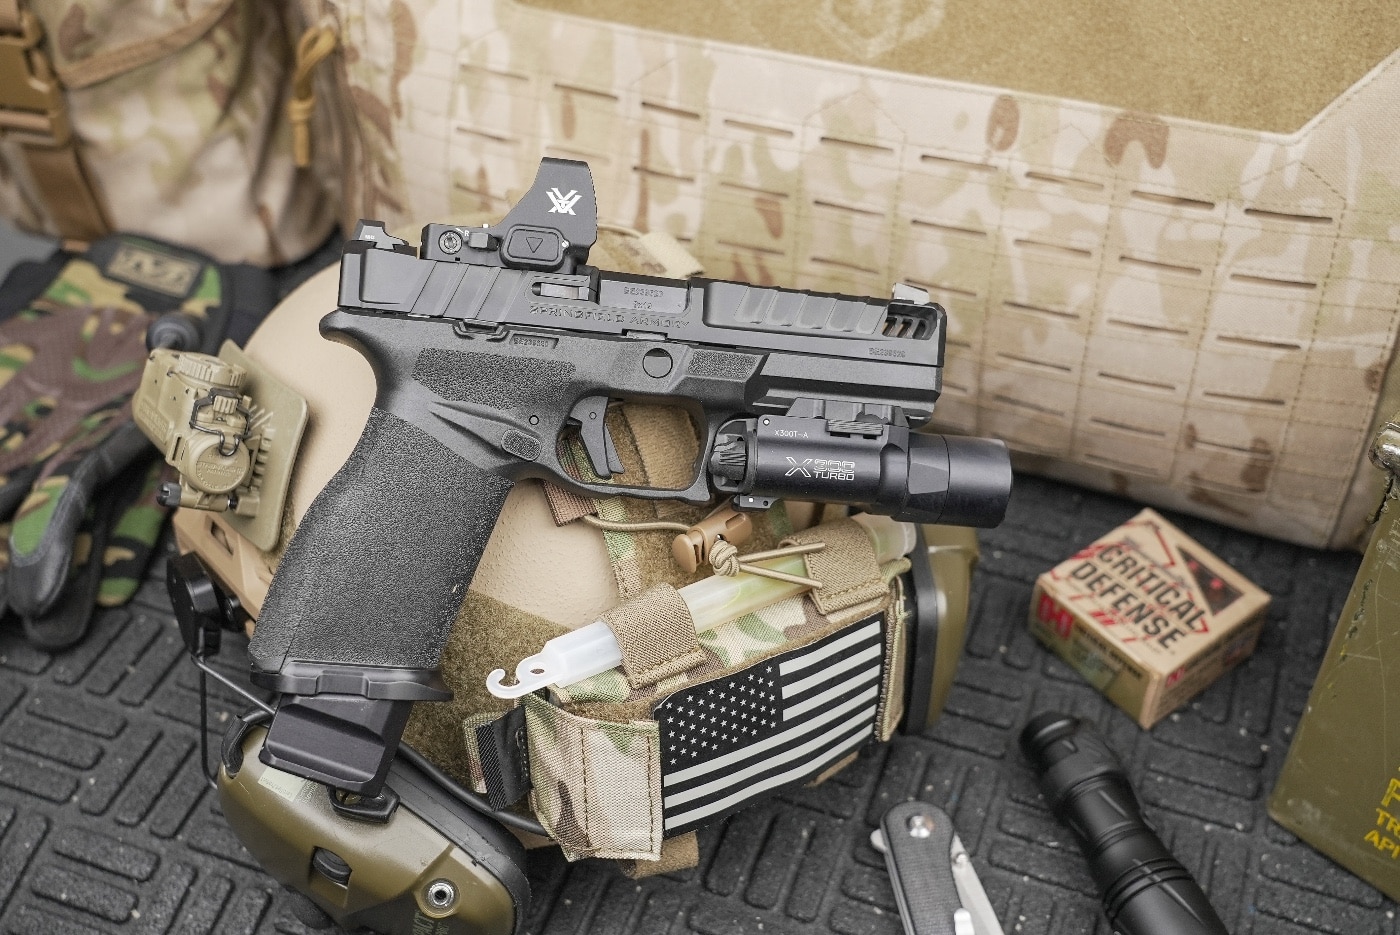 The Vortex Defender XL is built to endure the rigors of dynamic shooting, it includes a Glock MOS Adapter Plate, Picatinny Rail Mount, rubber cover, lens cloth, battery, custom tool, and mounting screws. This rugged optic ensures you stay competitive across various stages and targets.